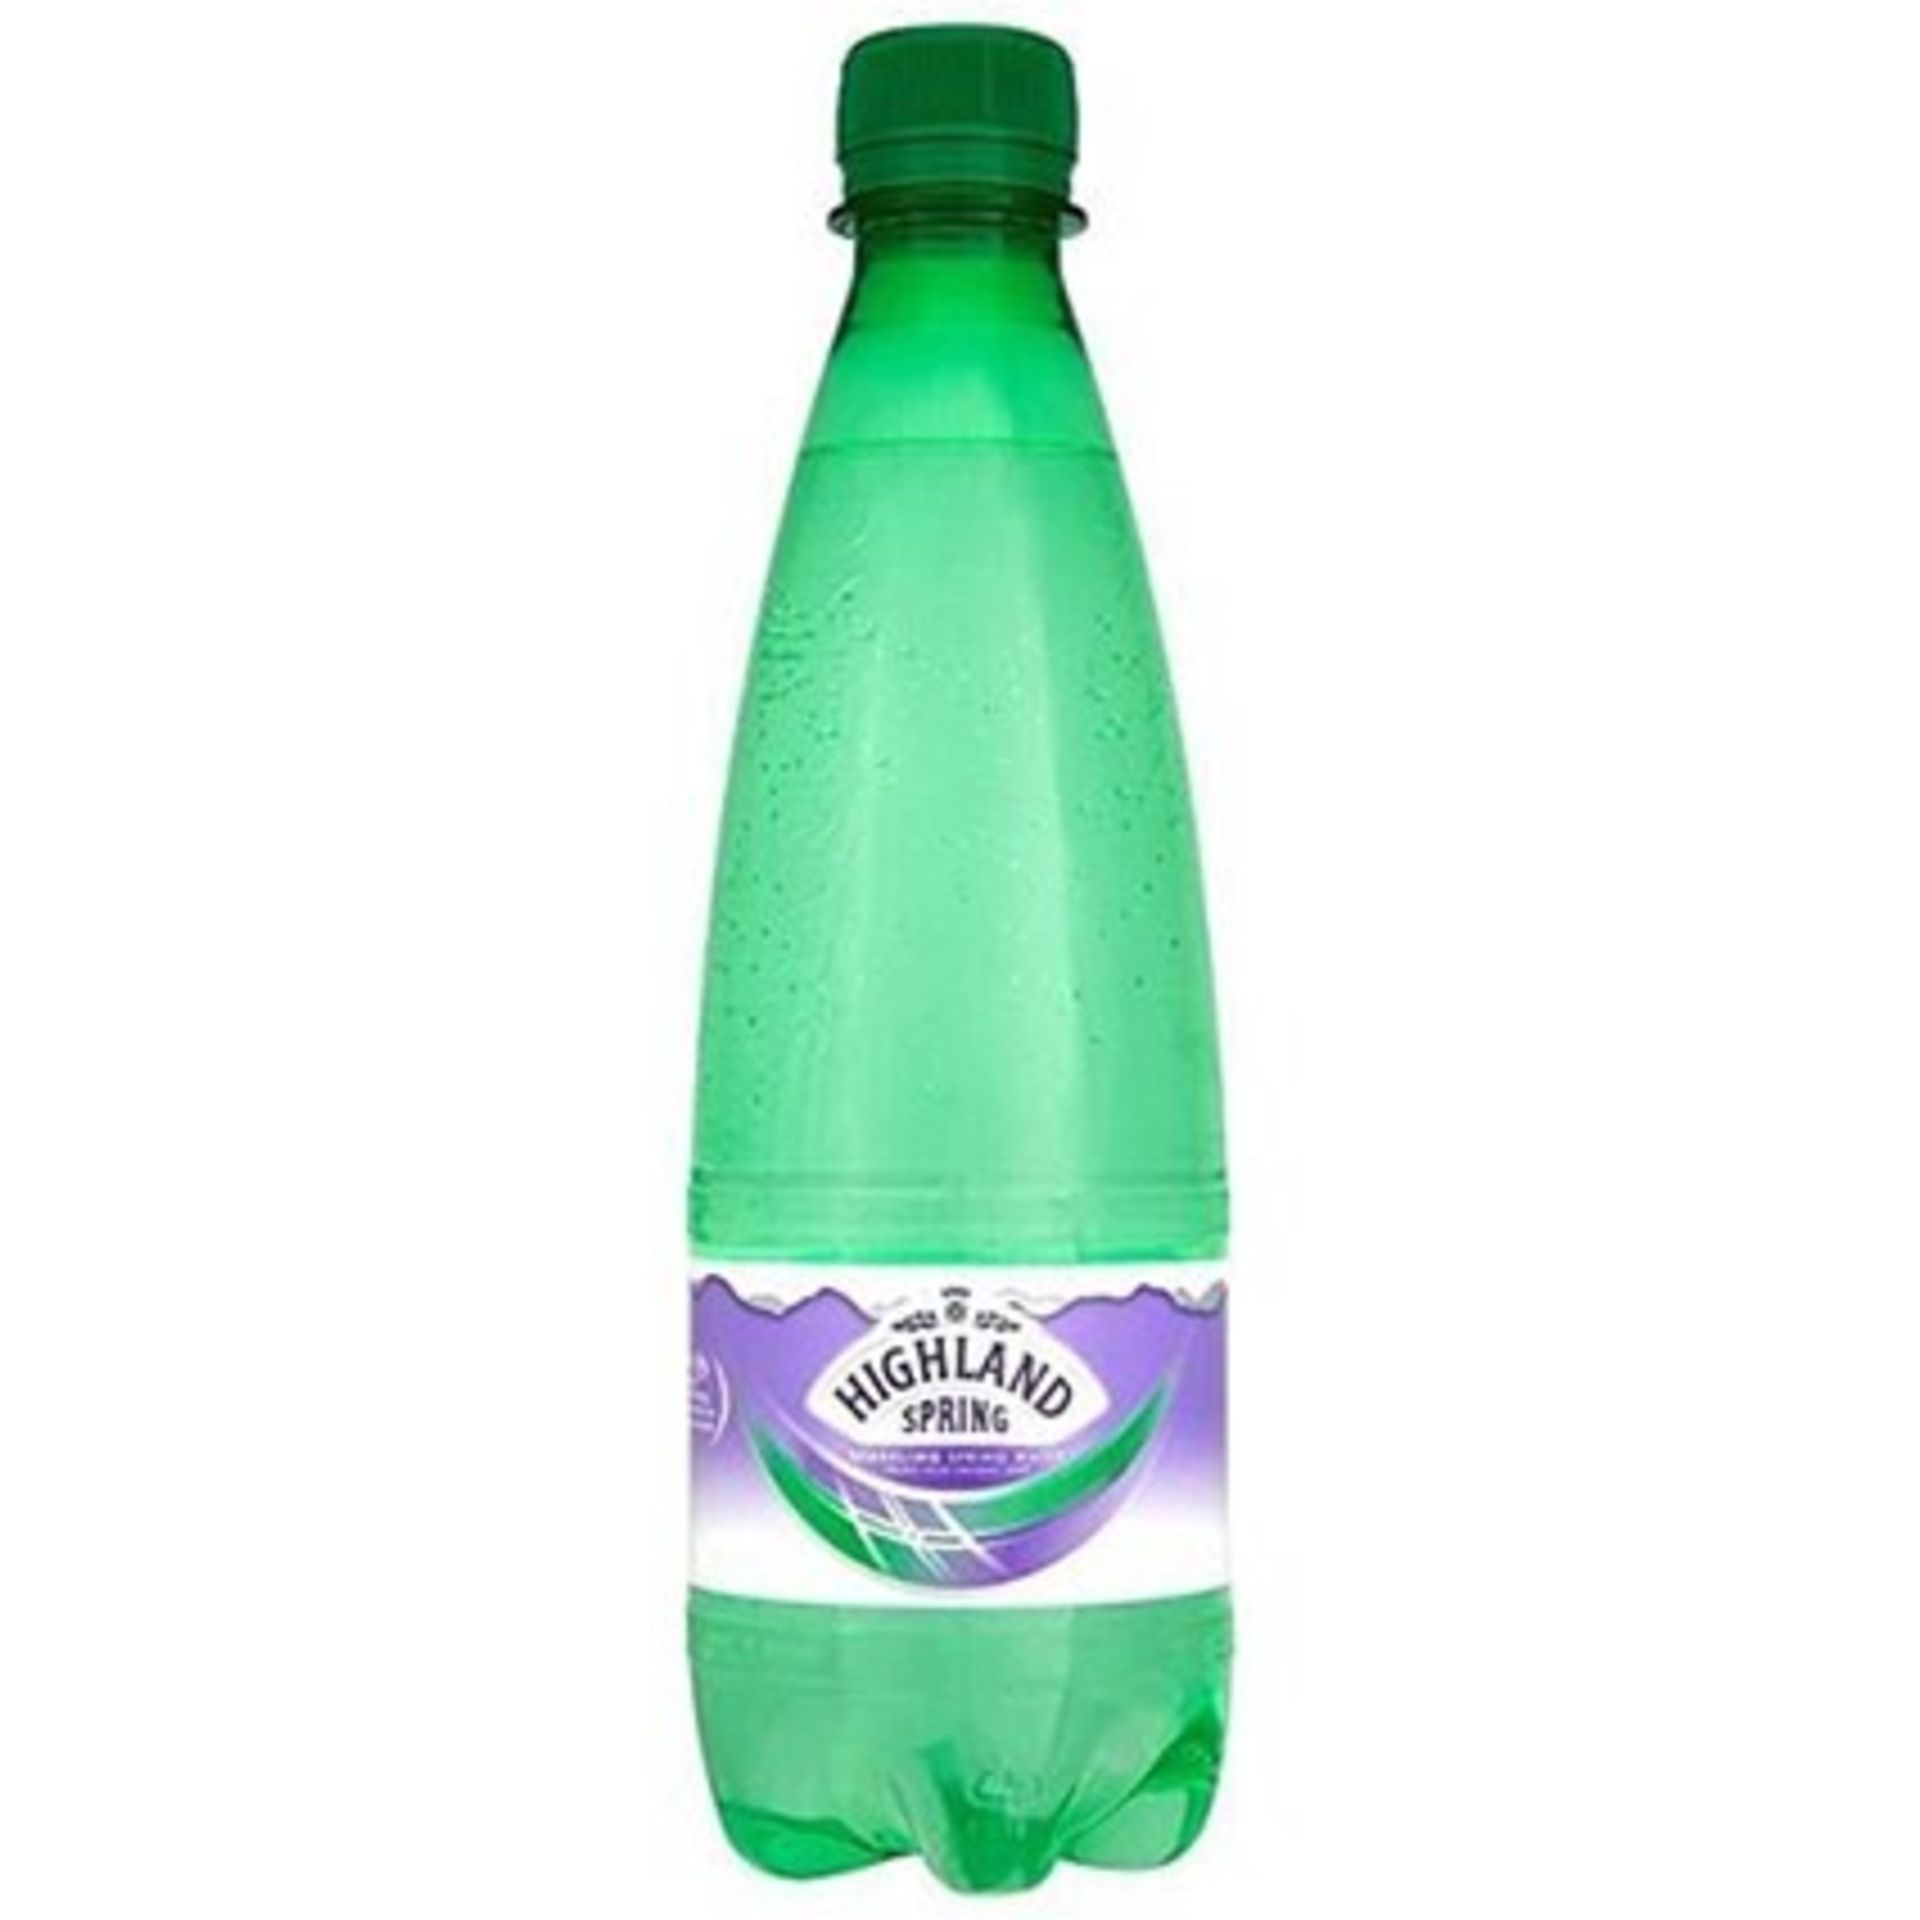 1 LOT TO CONTAIN 24 X 500ML BOTTLES OF HIGHLAND SPRING SPARKLING WATER / BEST BEFORE MARCH 2019 / PN